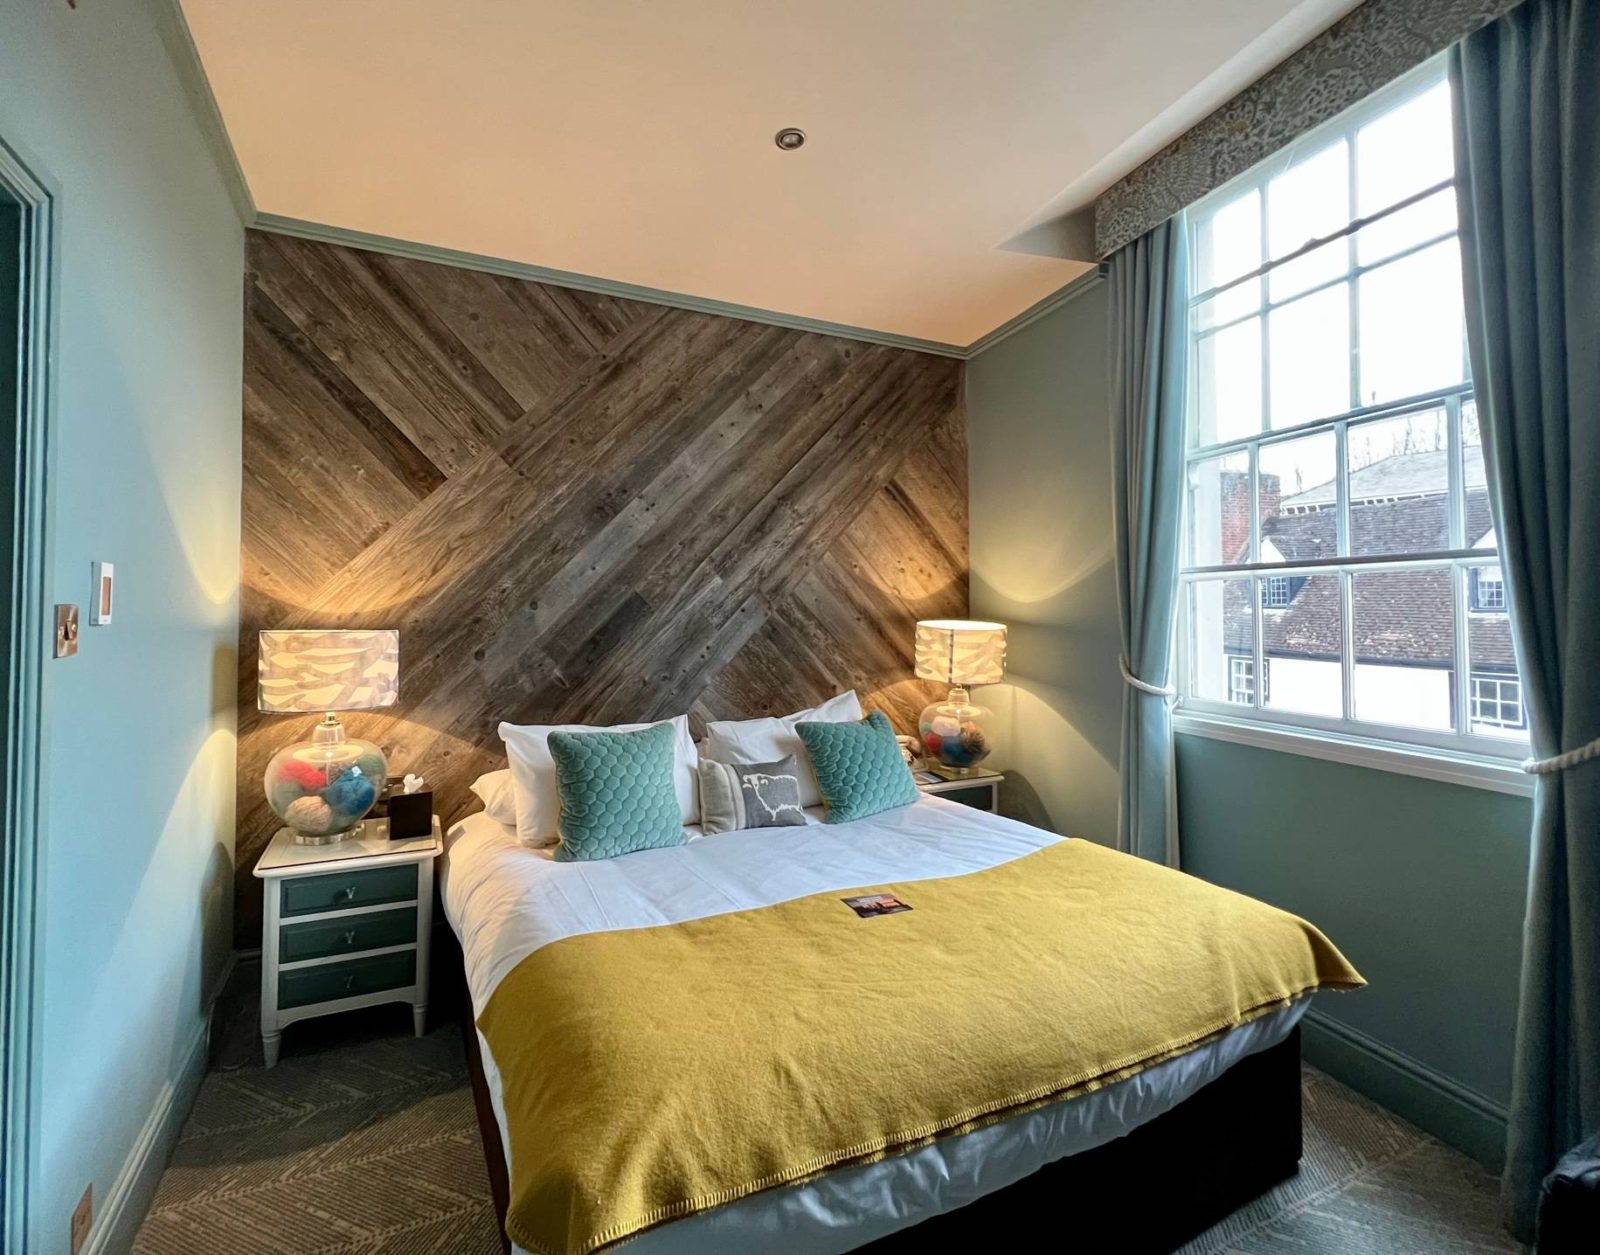 large bed with yellow bedspread in teal room with wooden accent wall